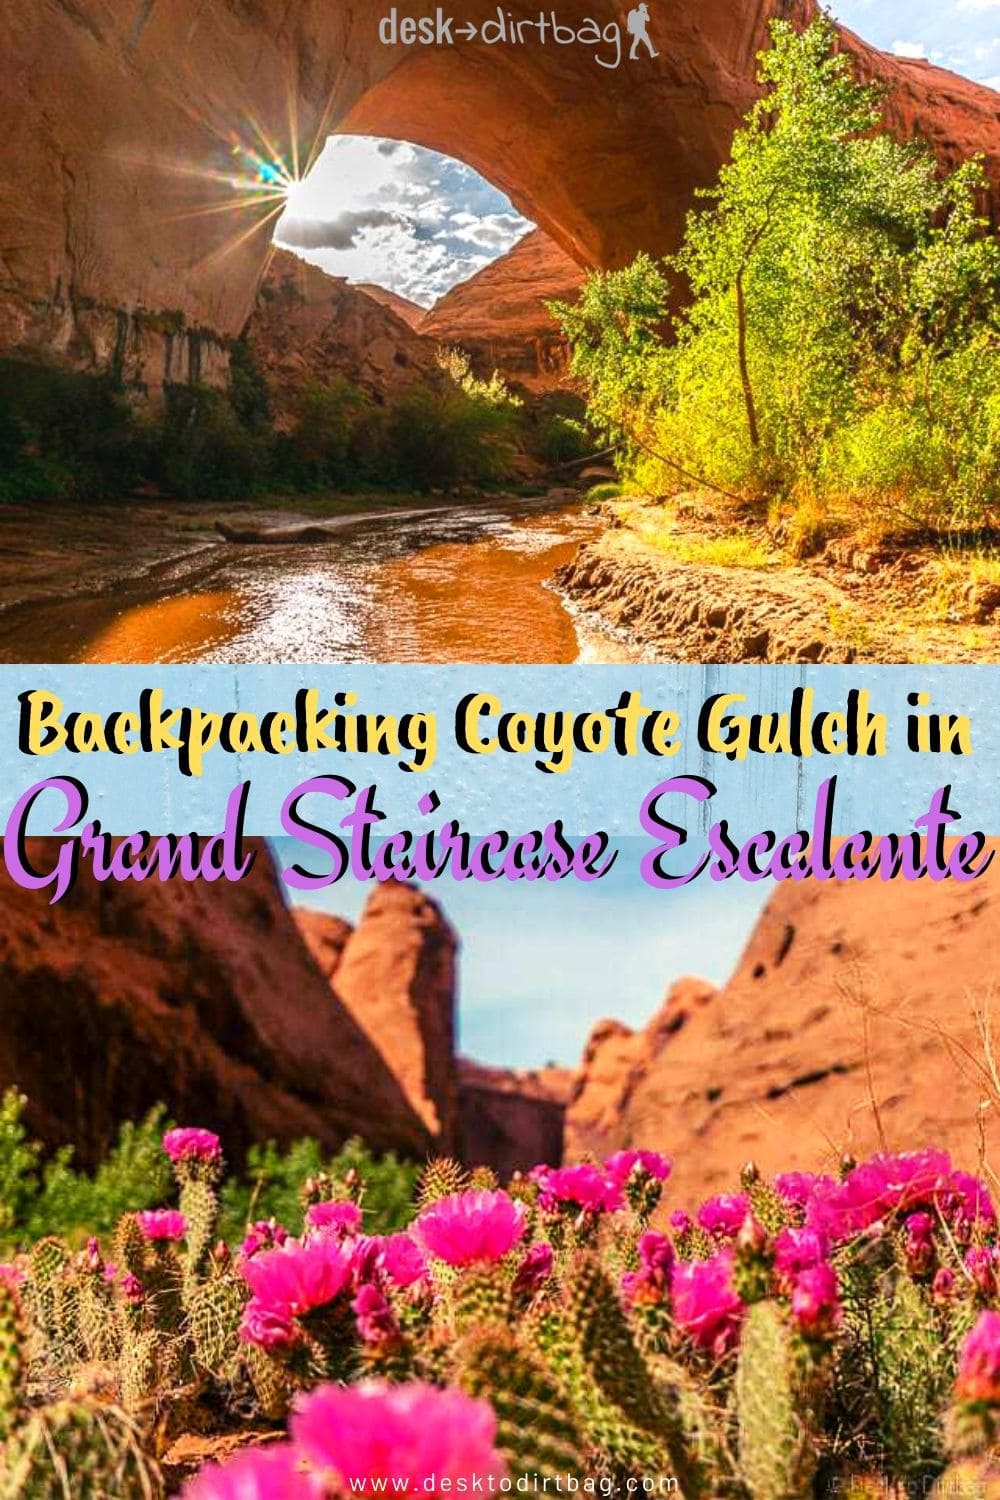 Backpacking Coyote Gulch in Grand Staircase-Escalante - Backpacking Coyote Gulch In GranD Staircase Escalante